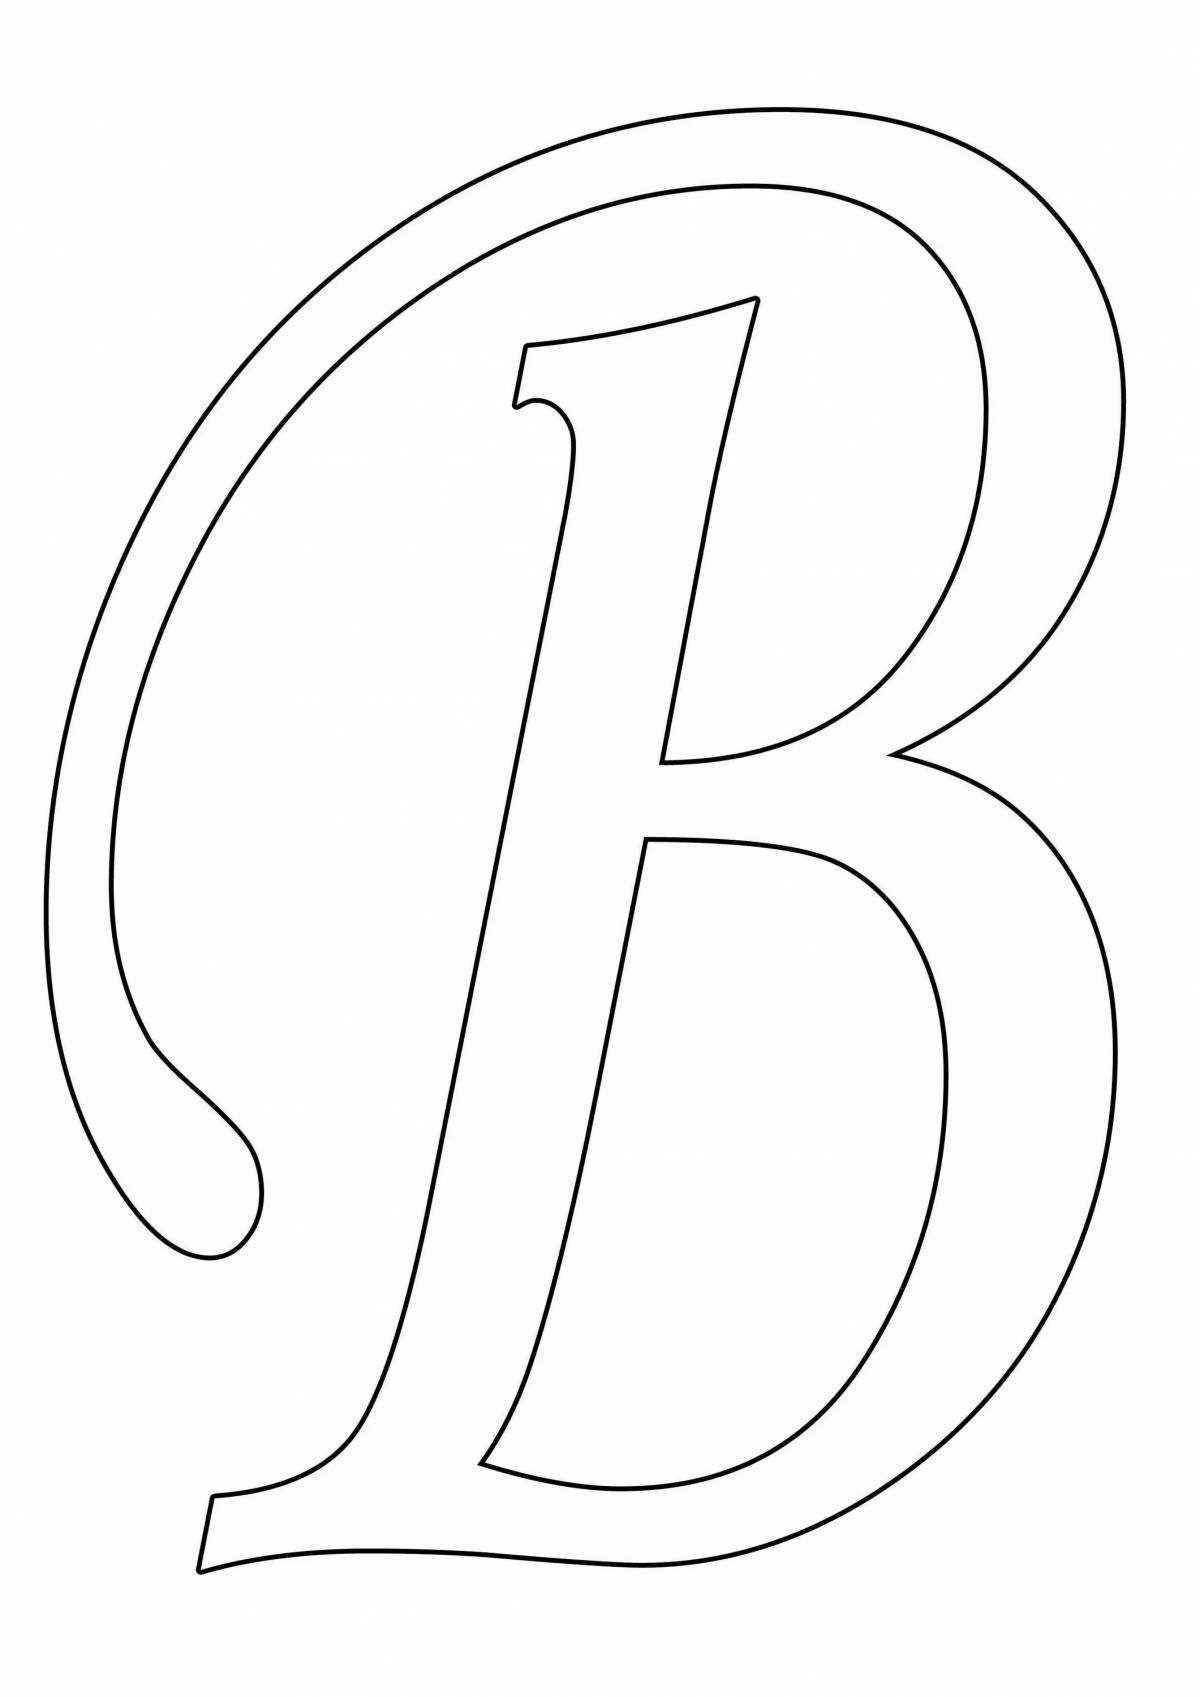 Colorful letters coloring book